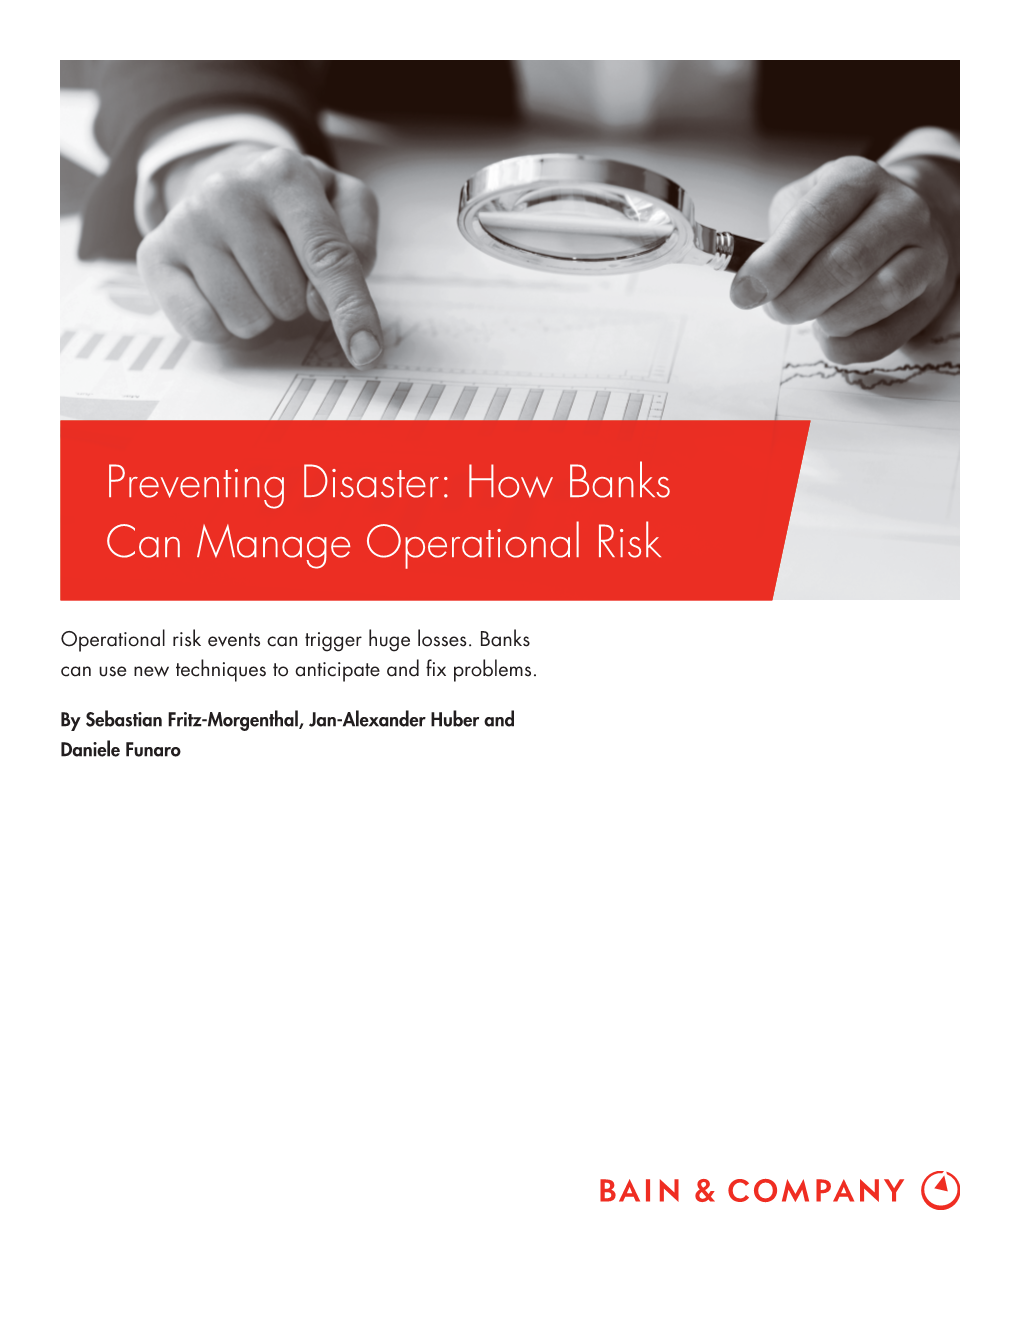 How Banks Can Manage Operational Risk